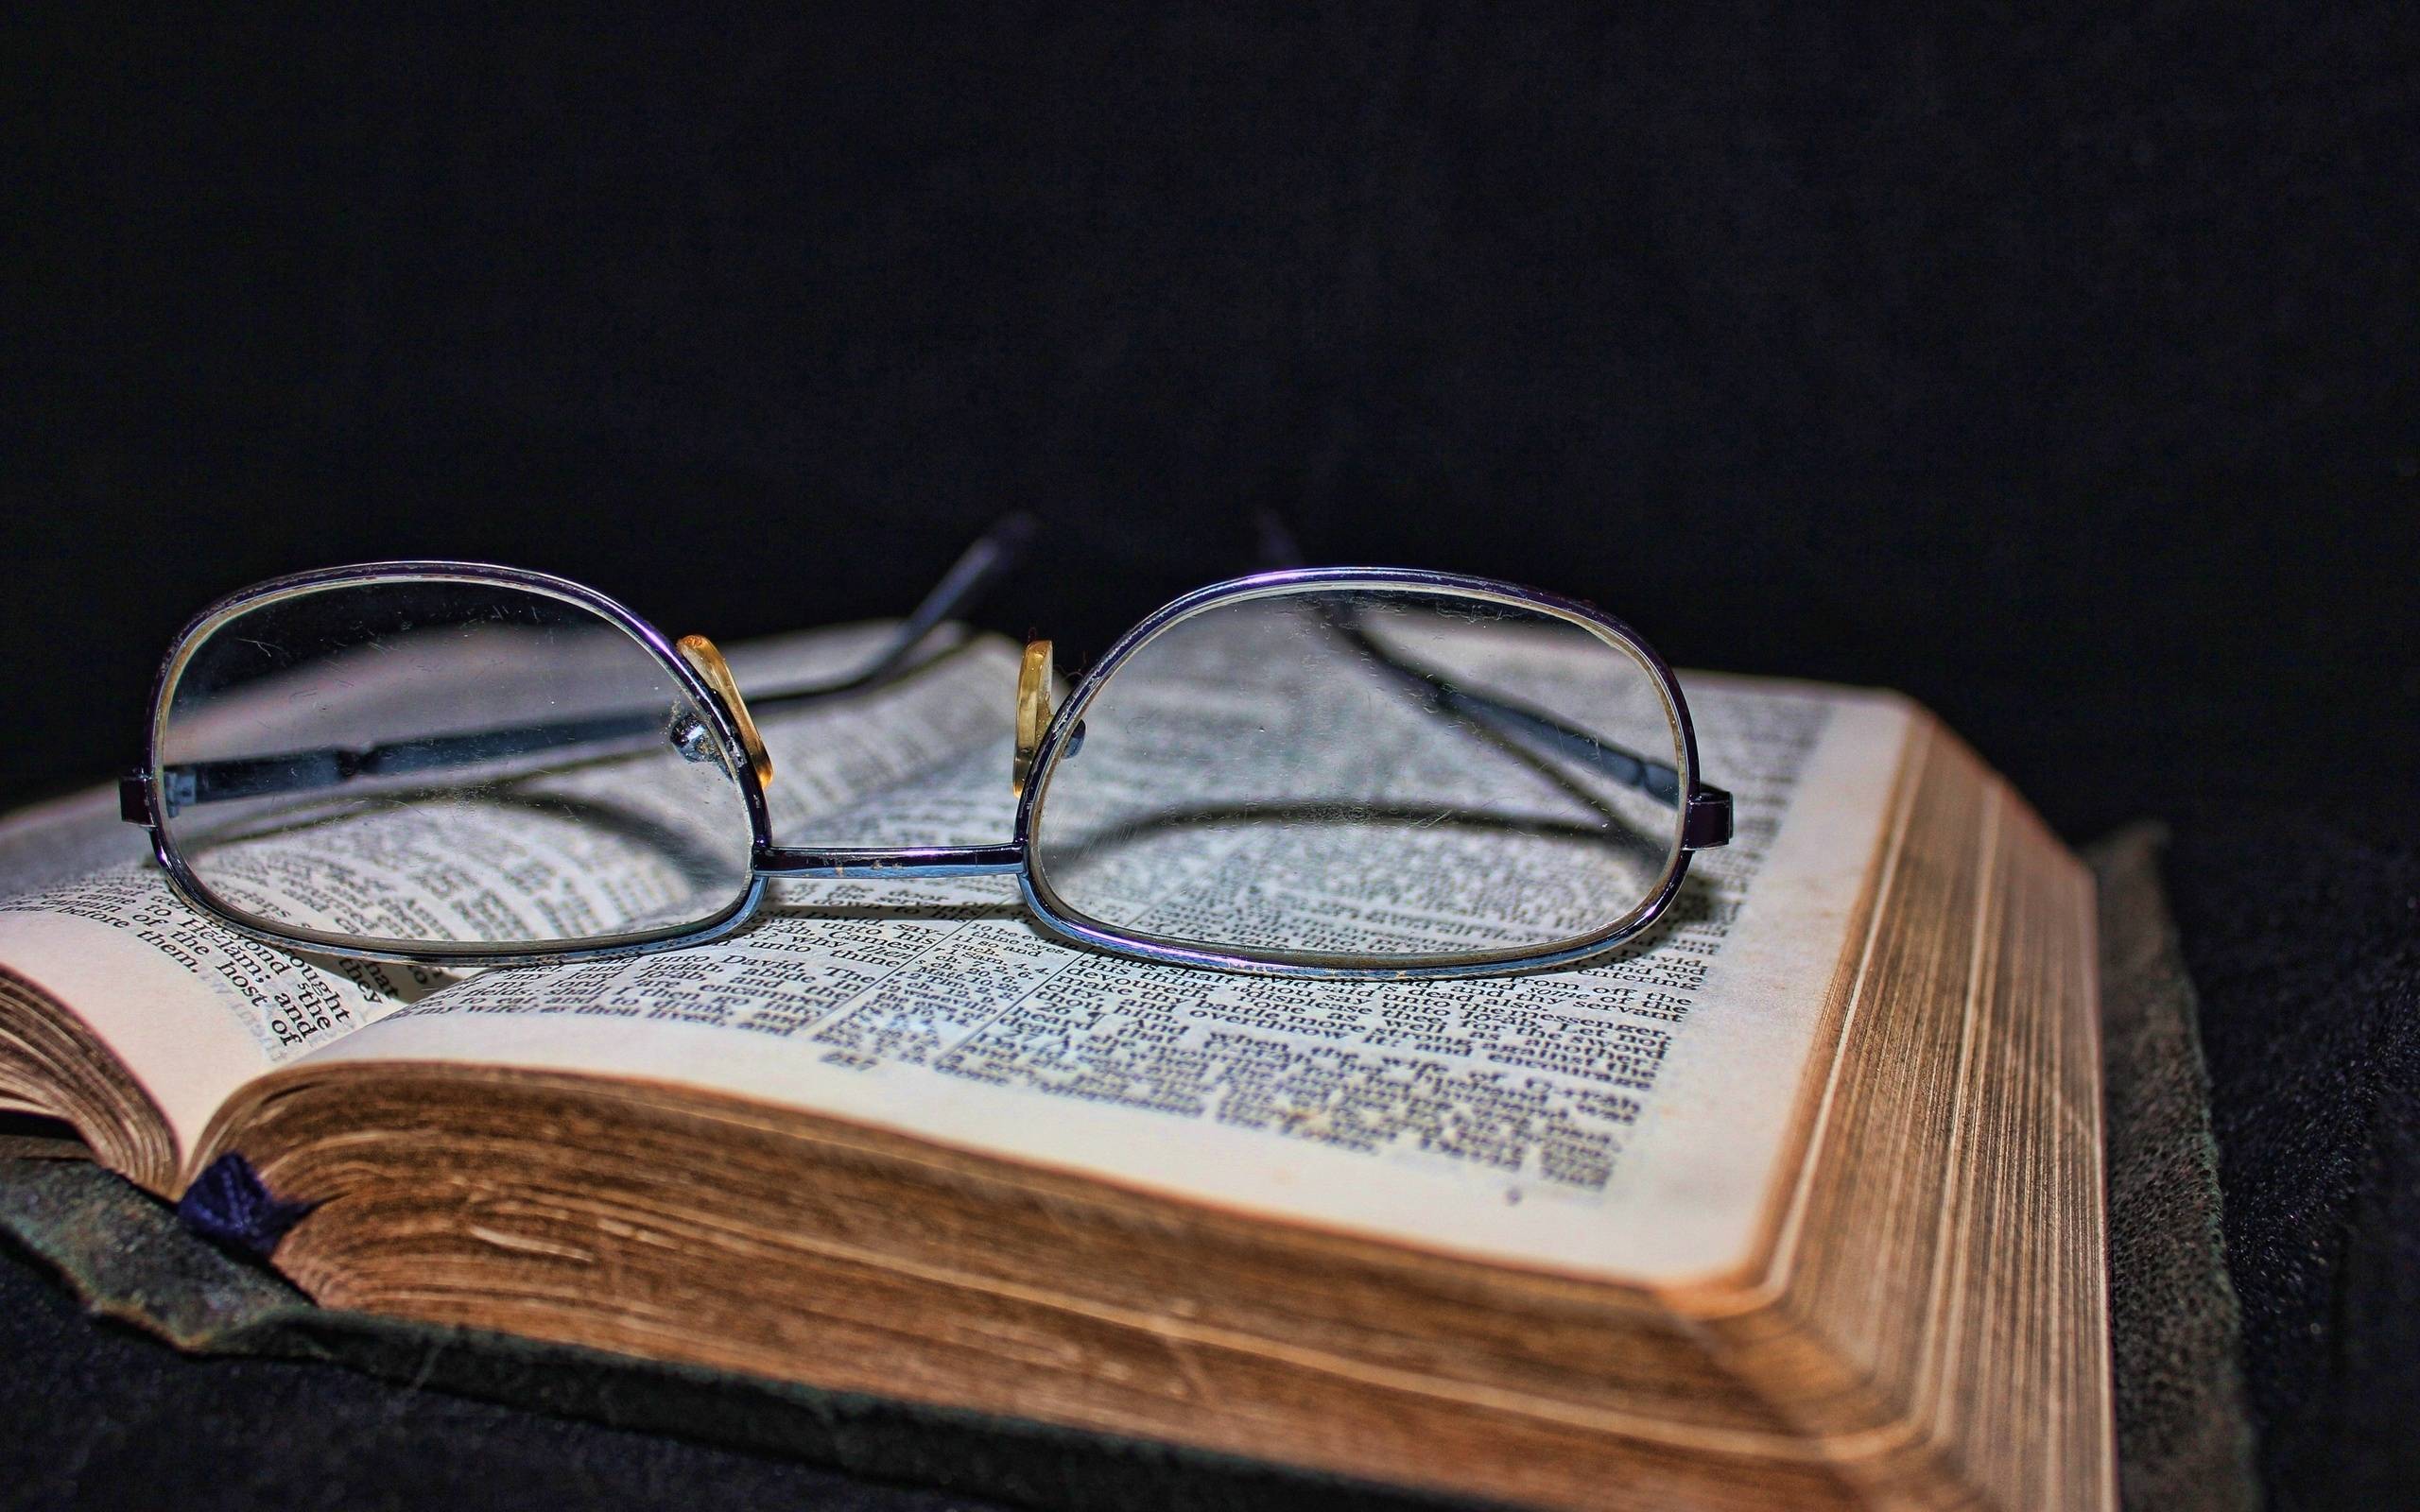 Wallpapers old book glasses mood on the desktop